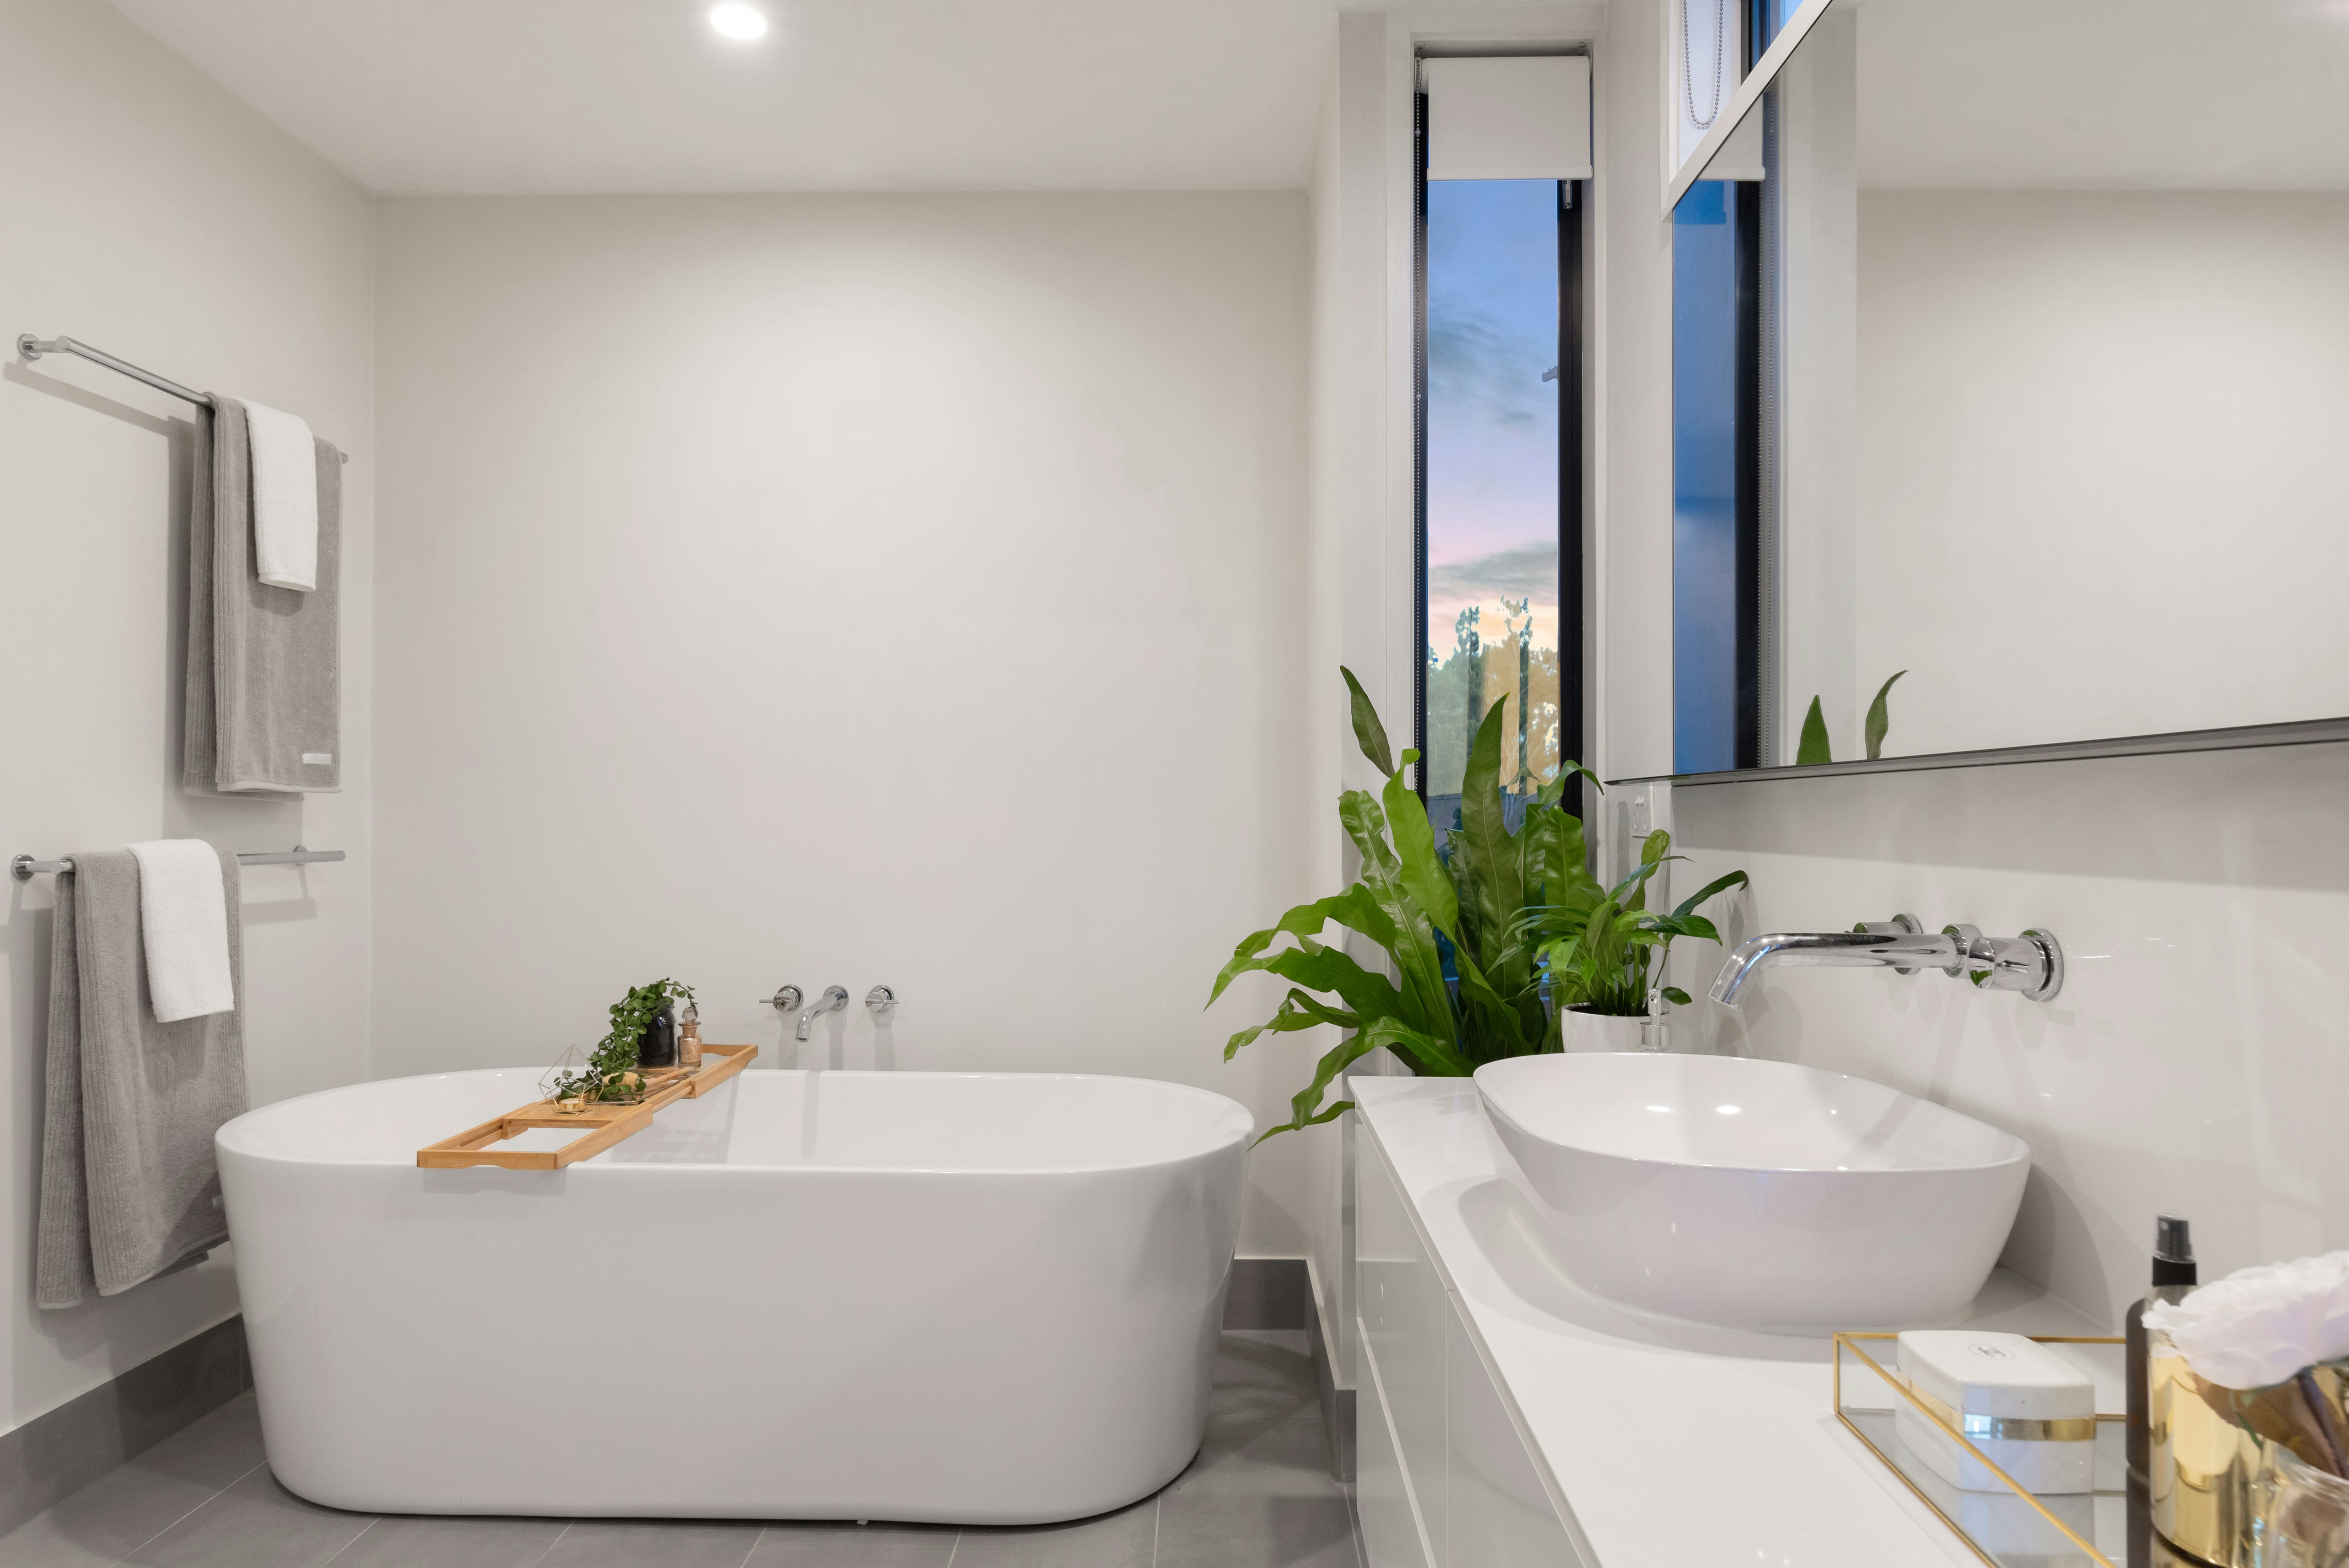 Walk-In Tubs Vs. Traditional Tubs: Choosing Your Tub: Comparing Walk-In And Traditional Bathtubs For Modern Homes